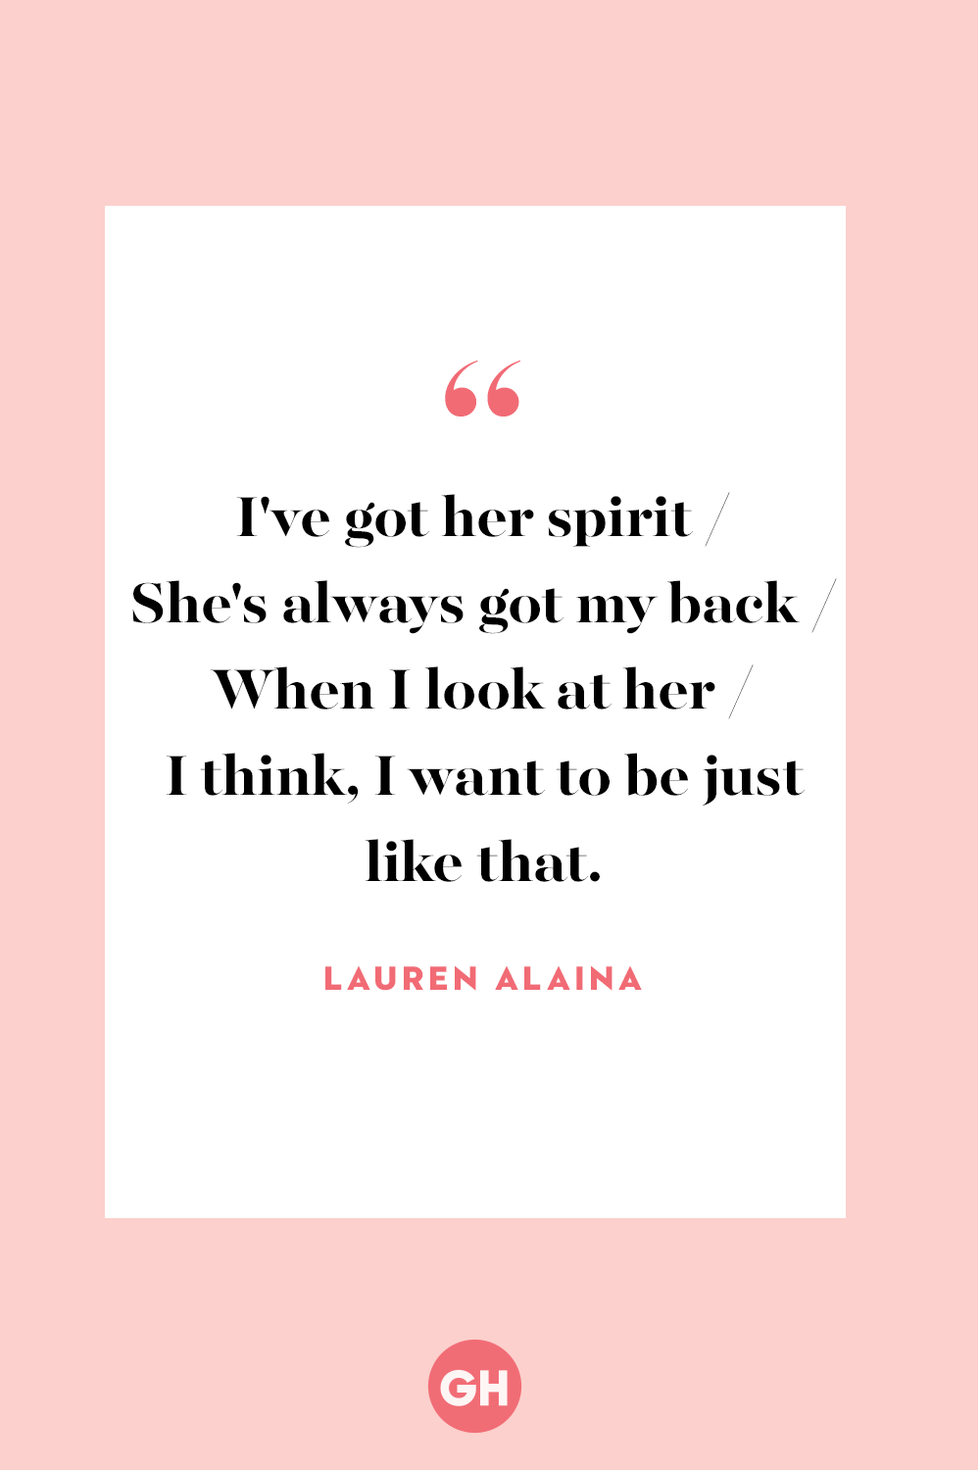 https://hips.hearstapps.com/hmg-prod/images/mother-in-law-quotes-lauren-alaina-640b8b160a3d6.png?crop=1xw:1xh;center,top&resize=980:*